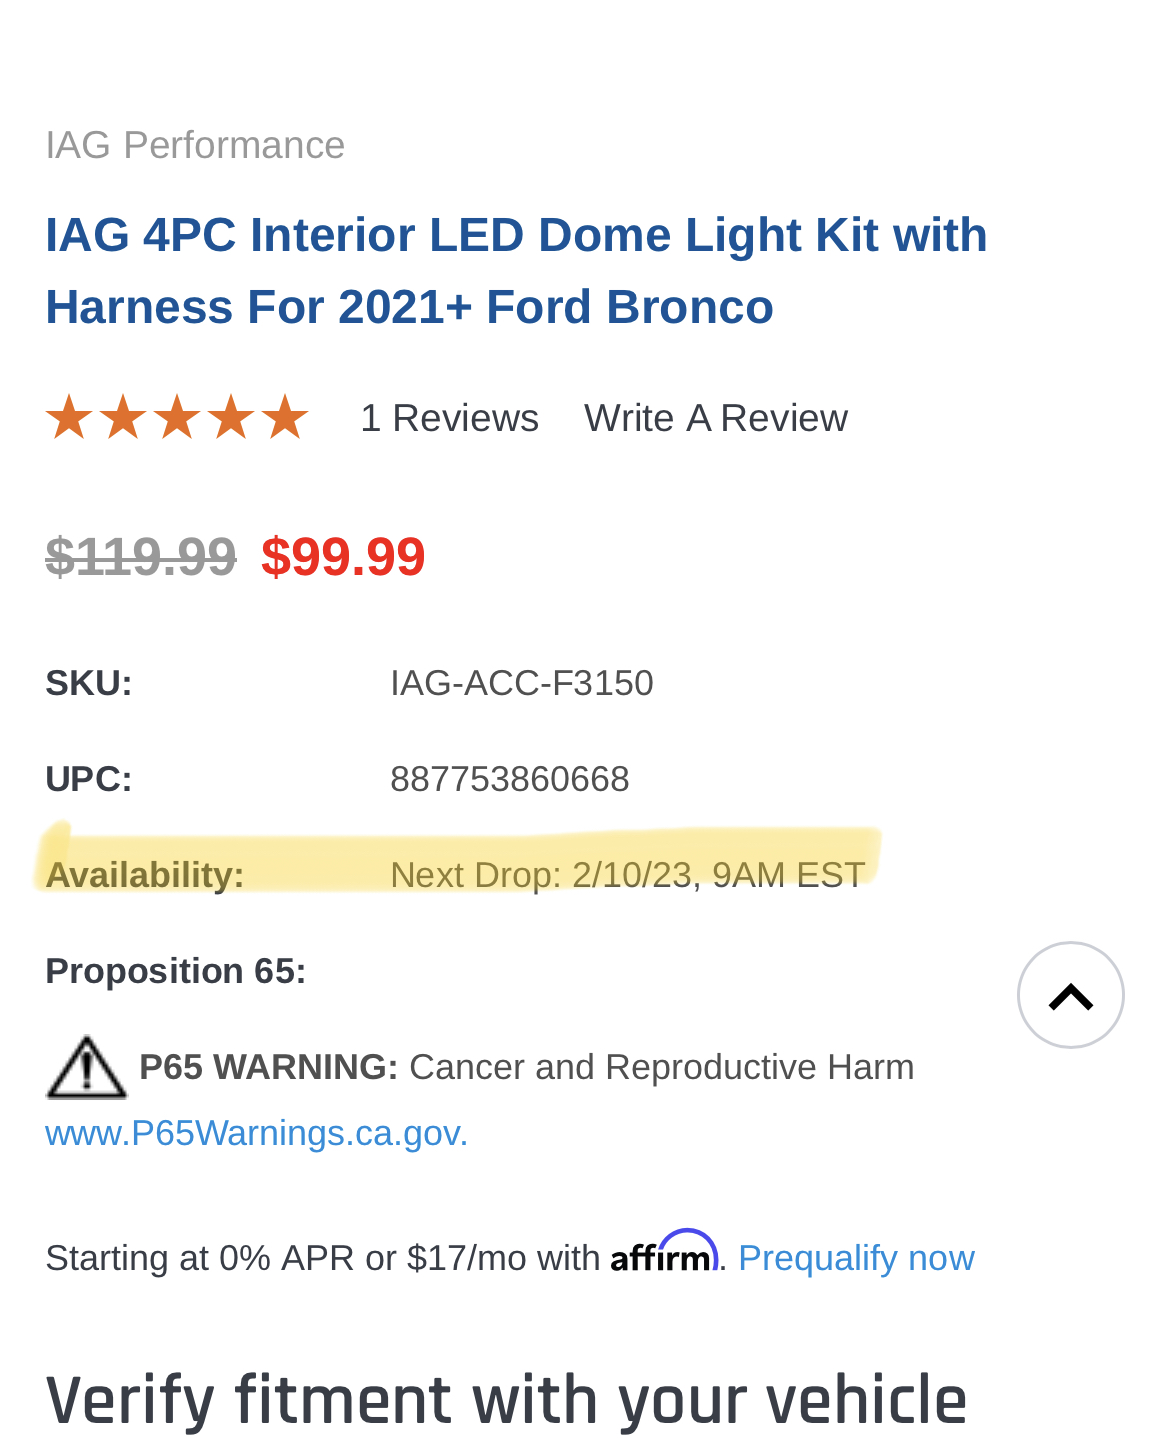 Ford Bronco New Product Release: IAG Four Piece Interior Dome Light Kit with Harness 091251C3-835E-4DF0-A690-5BD2EC228E0B